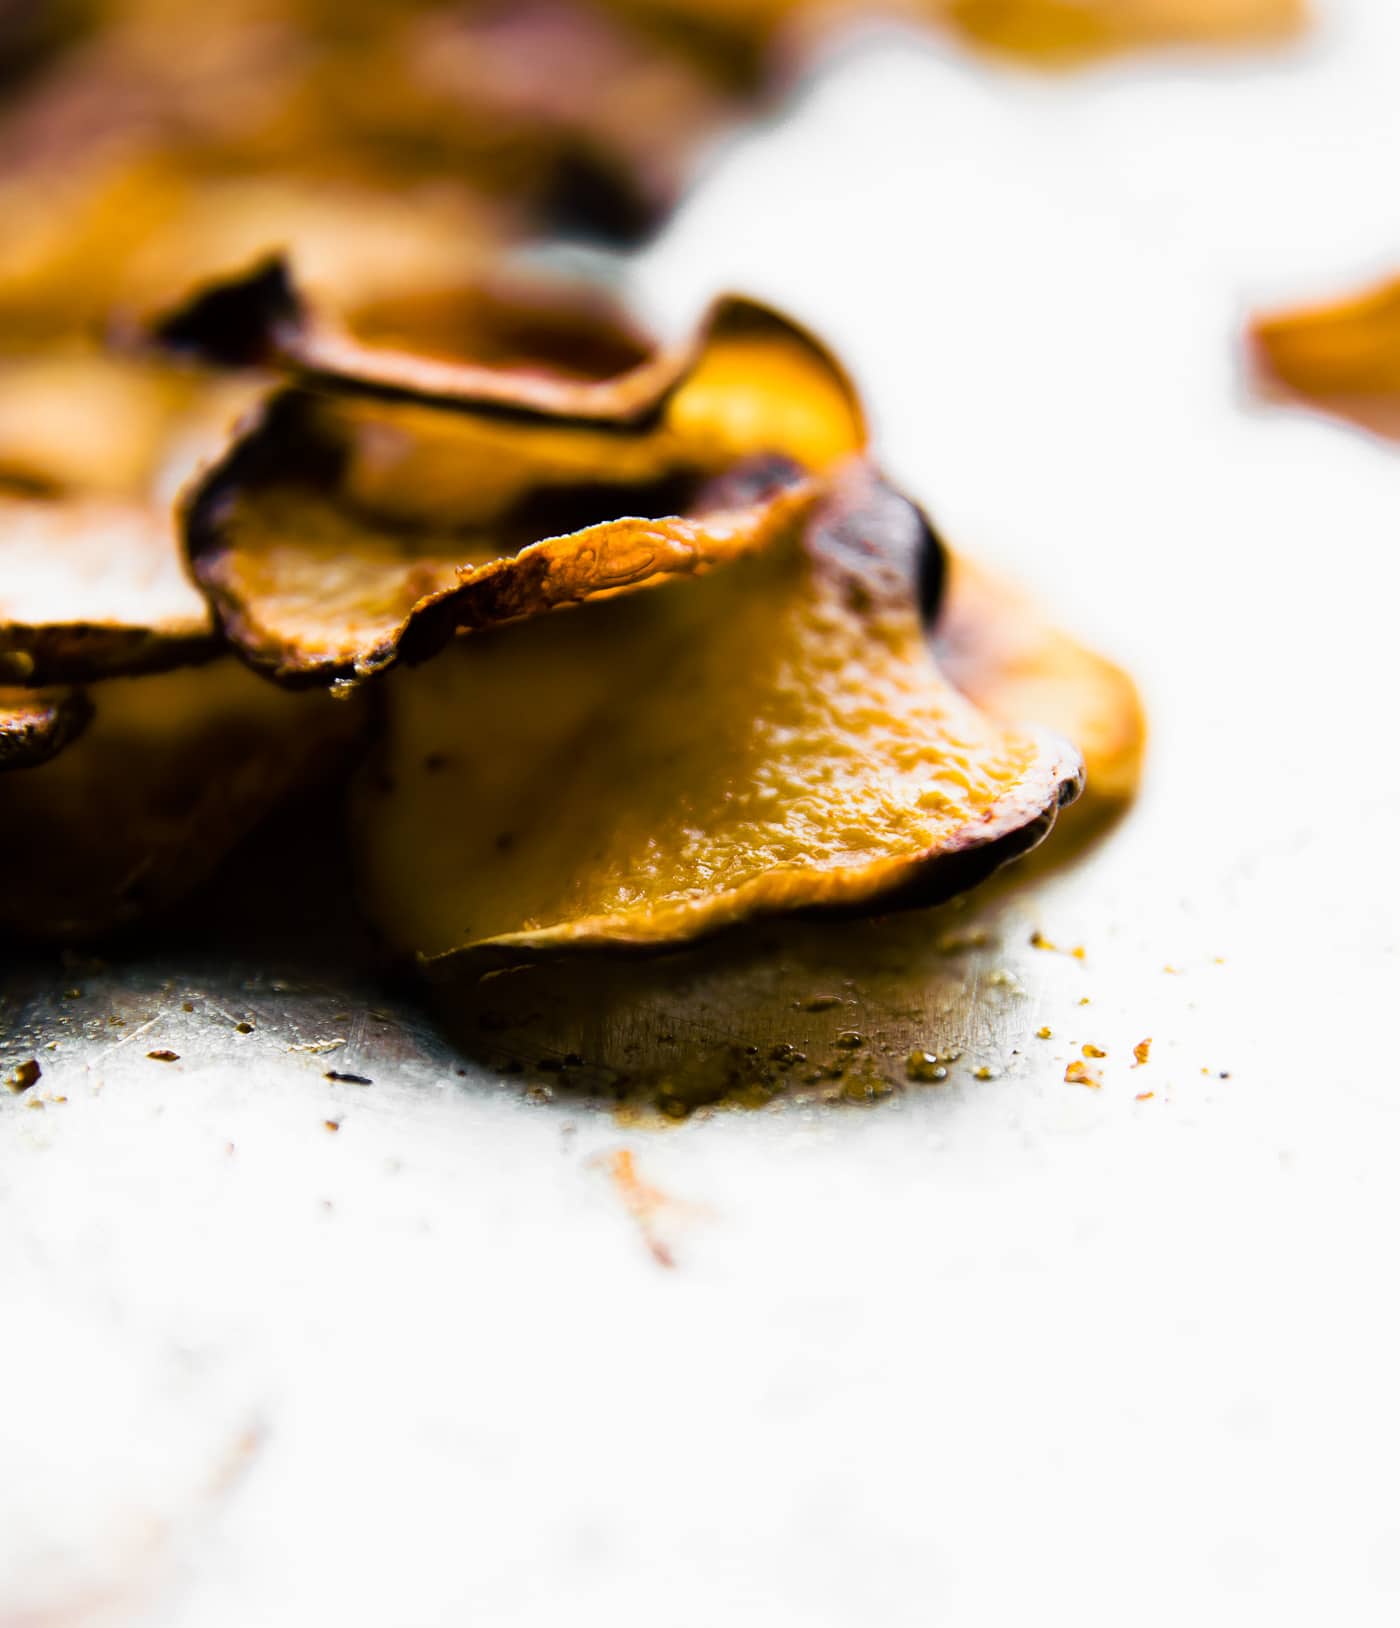 Gluten free BBQ Baked Rutabaga Chips! Healthy flavorful side dish for Summer BBQ's or any time of year! Rutabaga is a root vegetable that's easy to bake and cook with! A great lower carb and paleo option for baked potato chips. #homemade #paleo #veggiechips #vegan #whole30